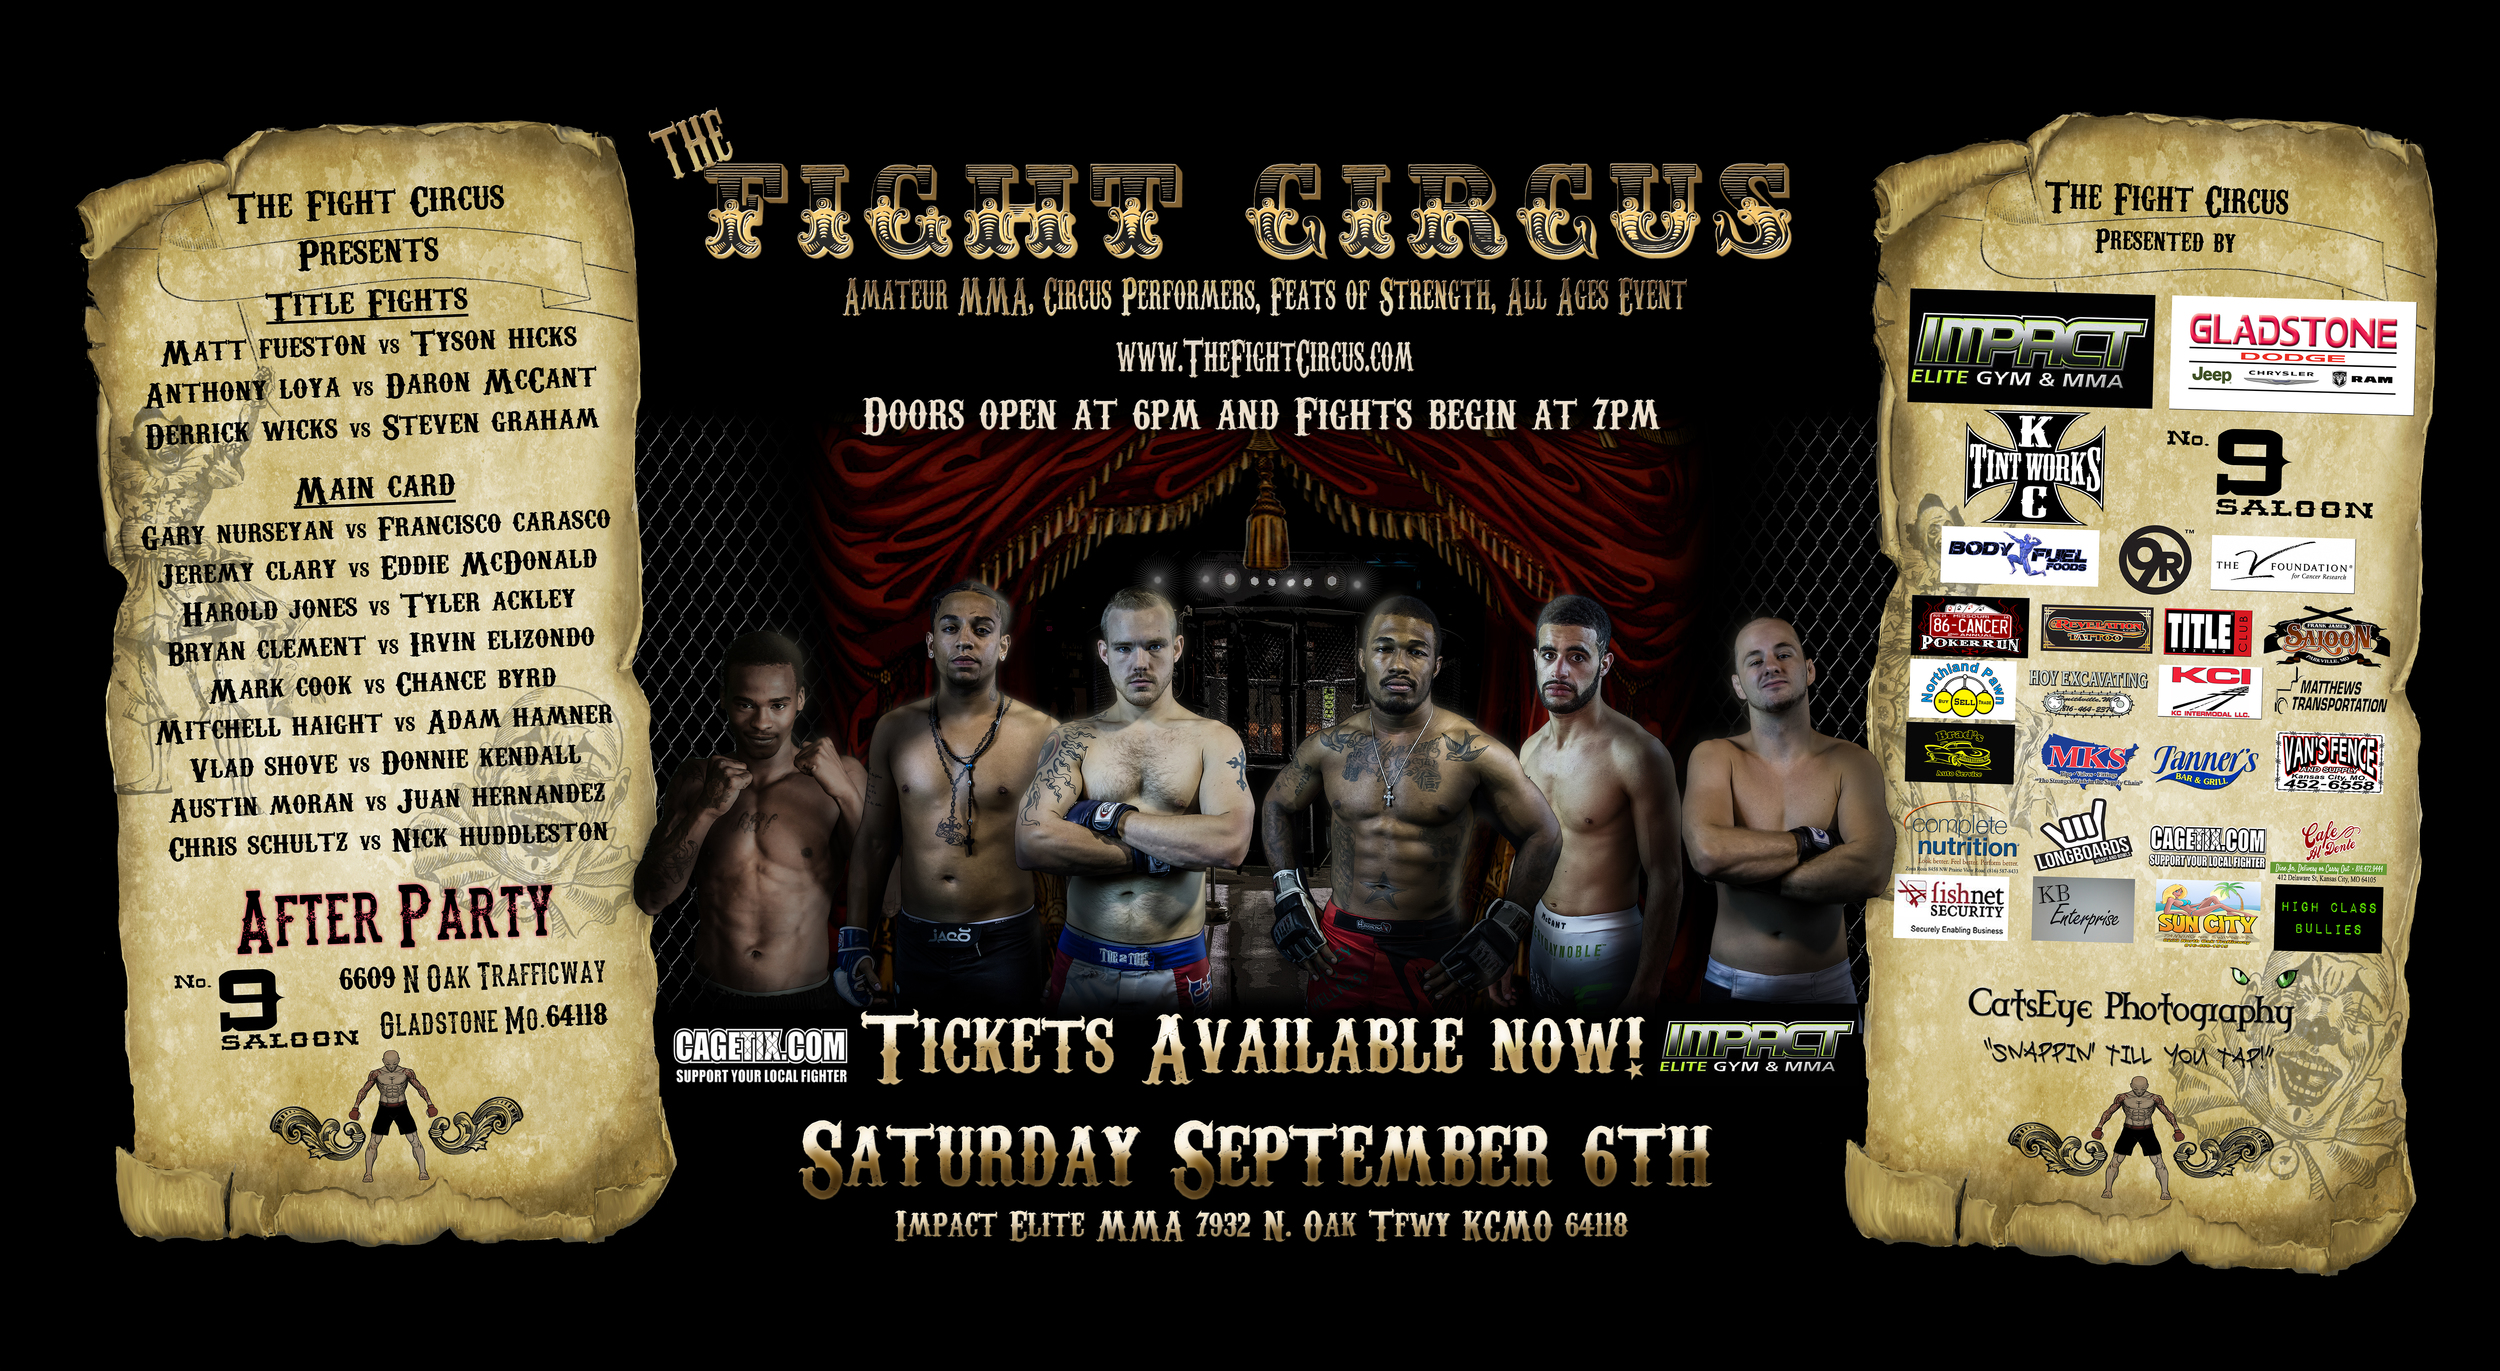 FIGHT CIRCUS POSTER.jpg